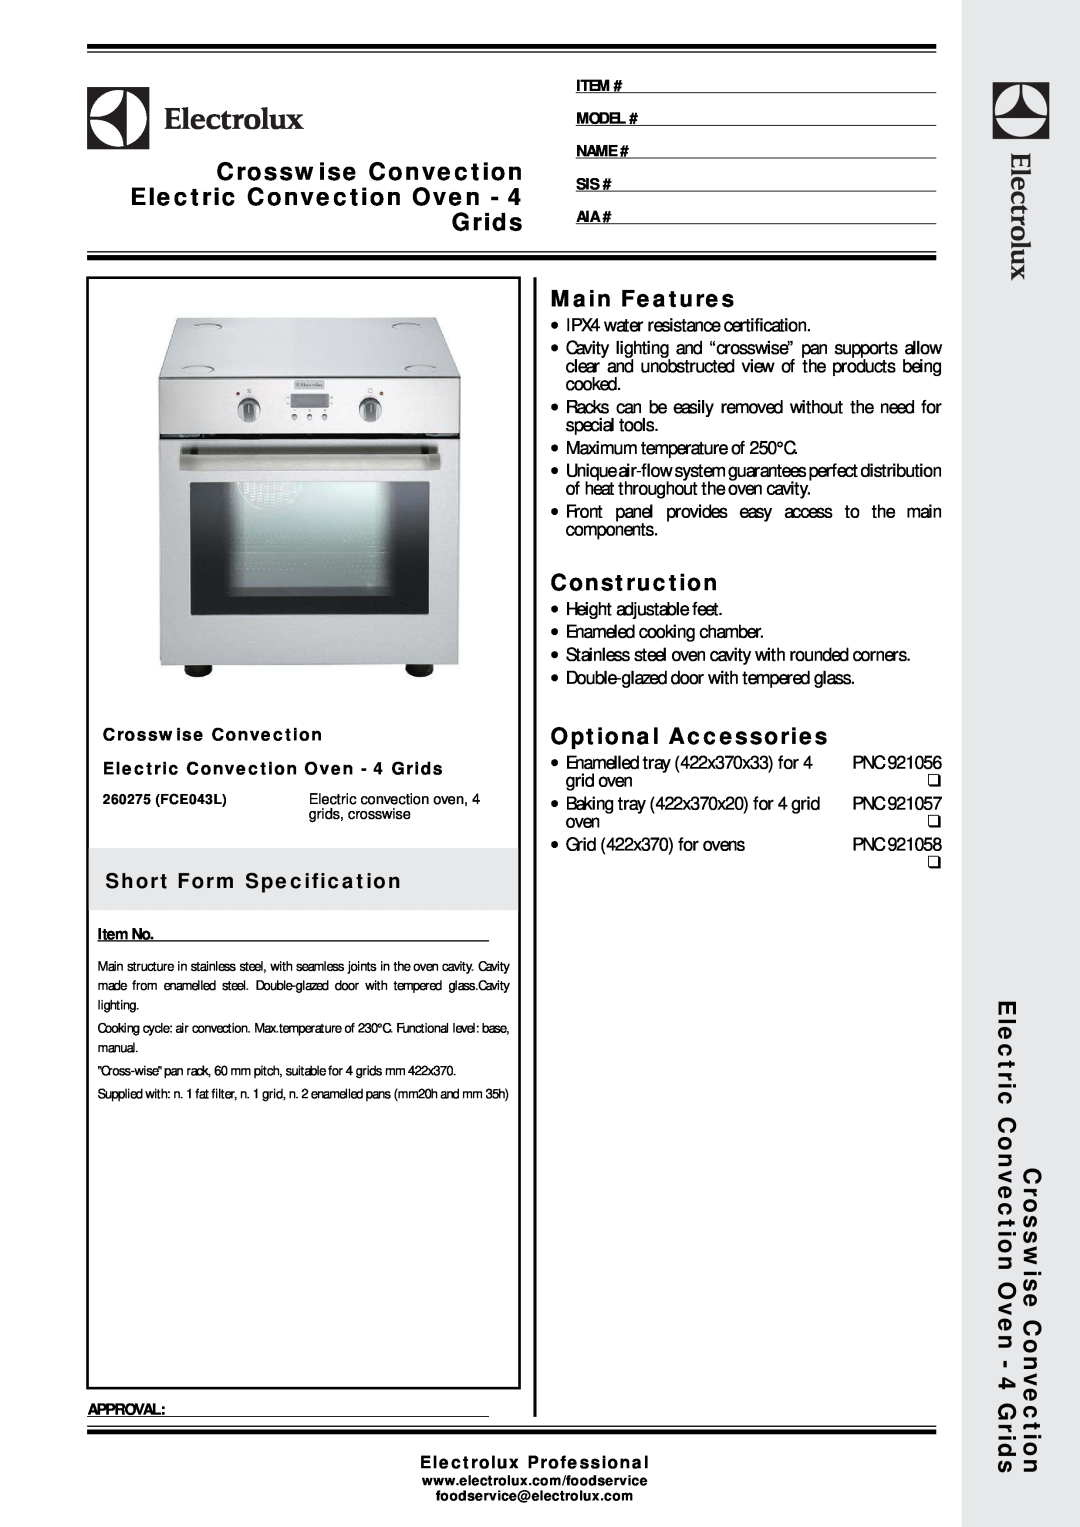 Electrolux FCE043L manual Crosswise Convection, Electric Convection Oven - 4 Grids, Electrolux Professional 